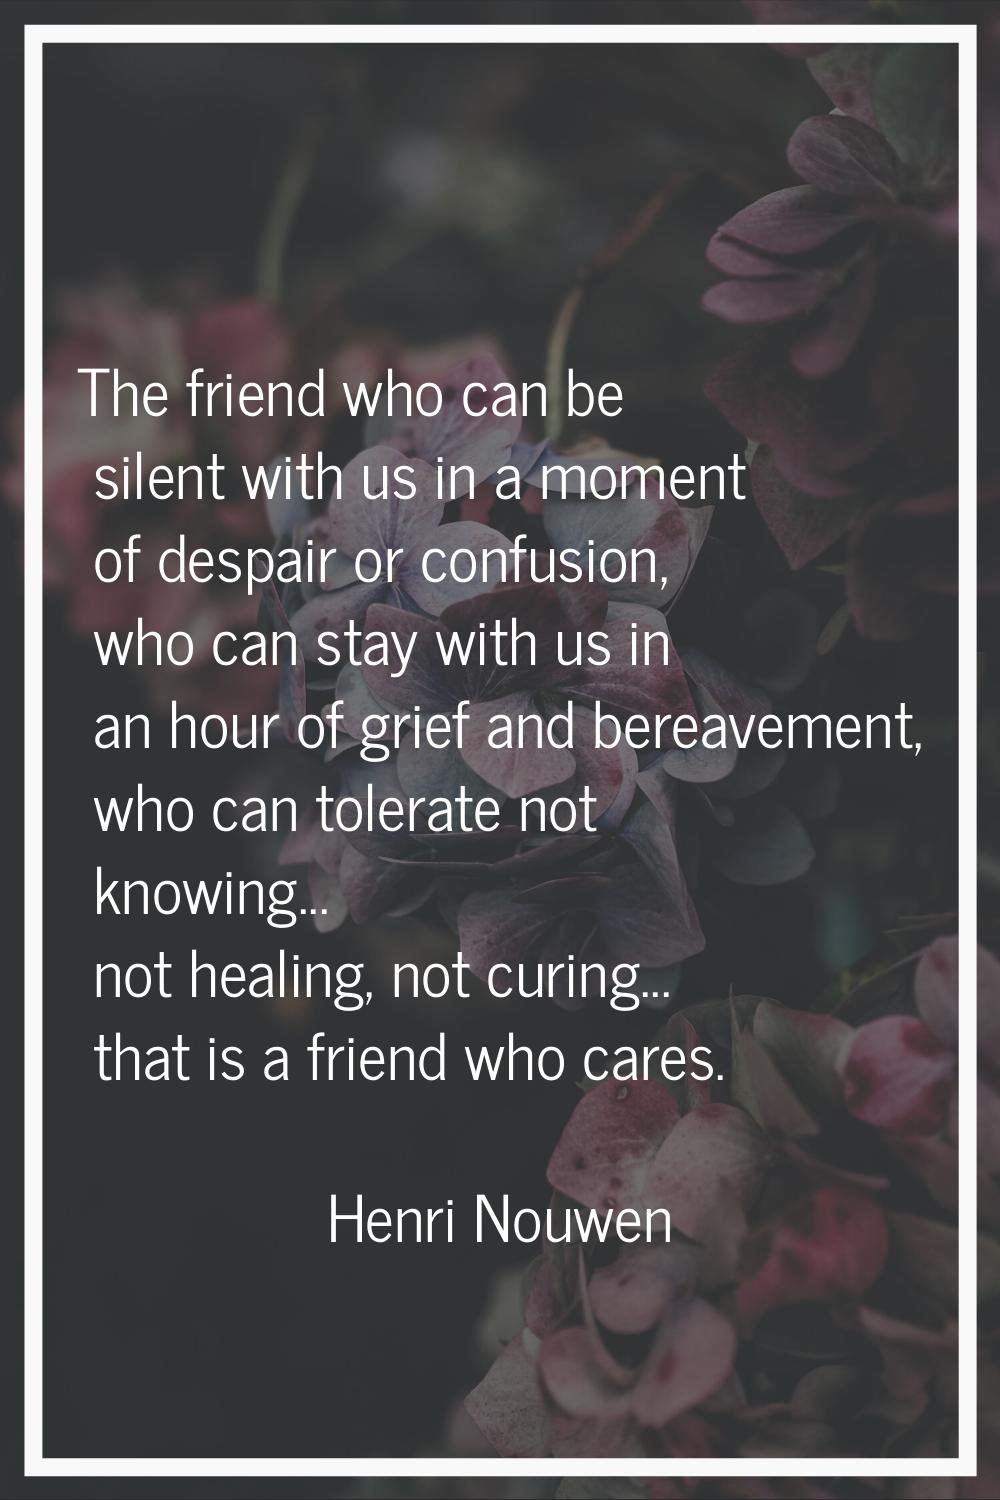 The friend who can be silent with us in a moment of despair or confusion, who can stay with us in a